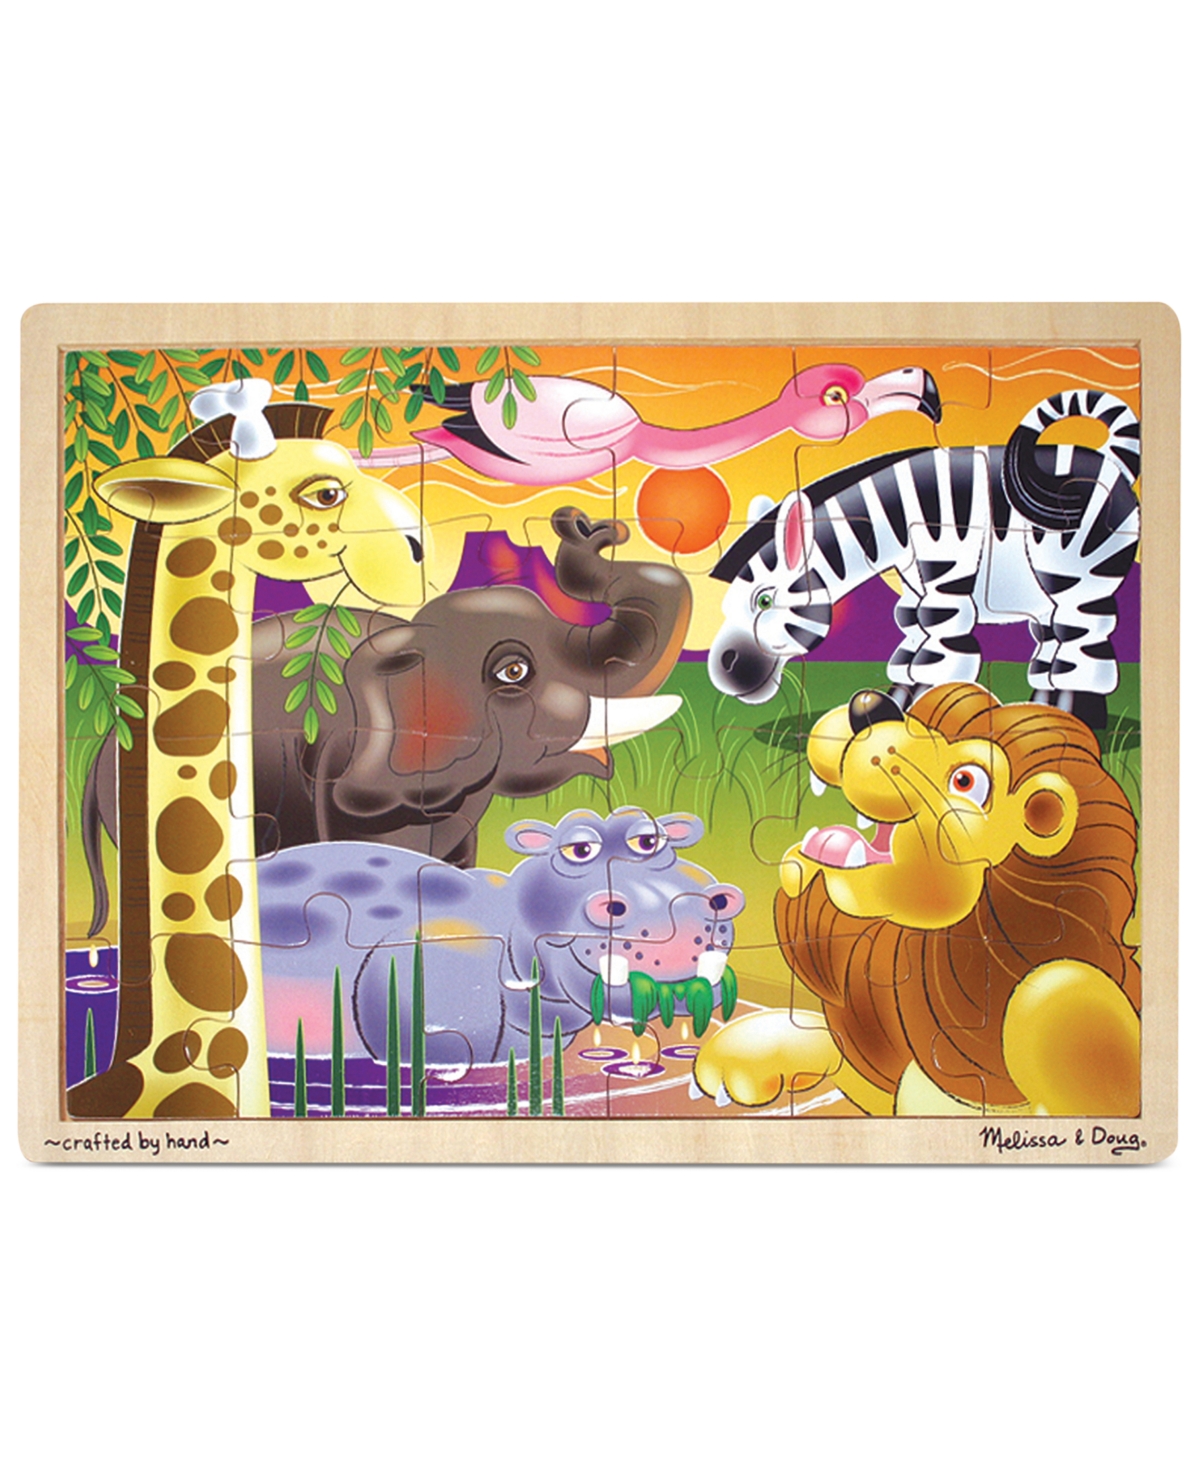 Melissa & Doug Kids Toy, African Plains 24-piece Jigsaw Puzzle In Multi